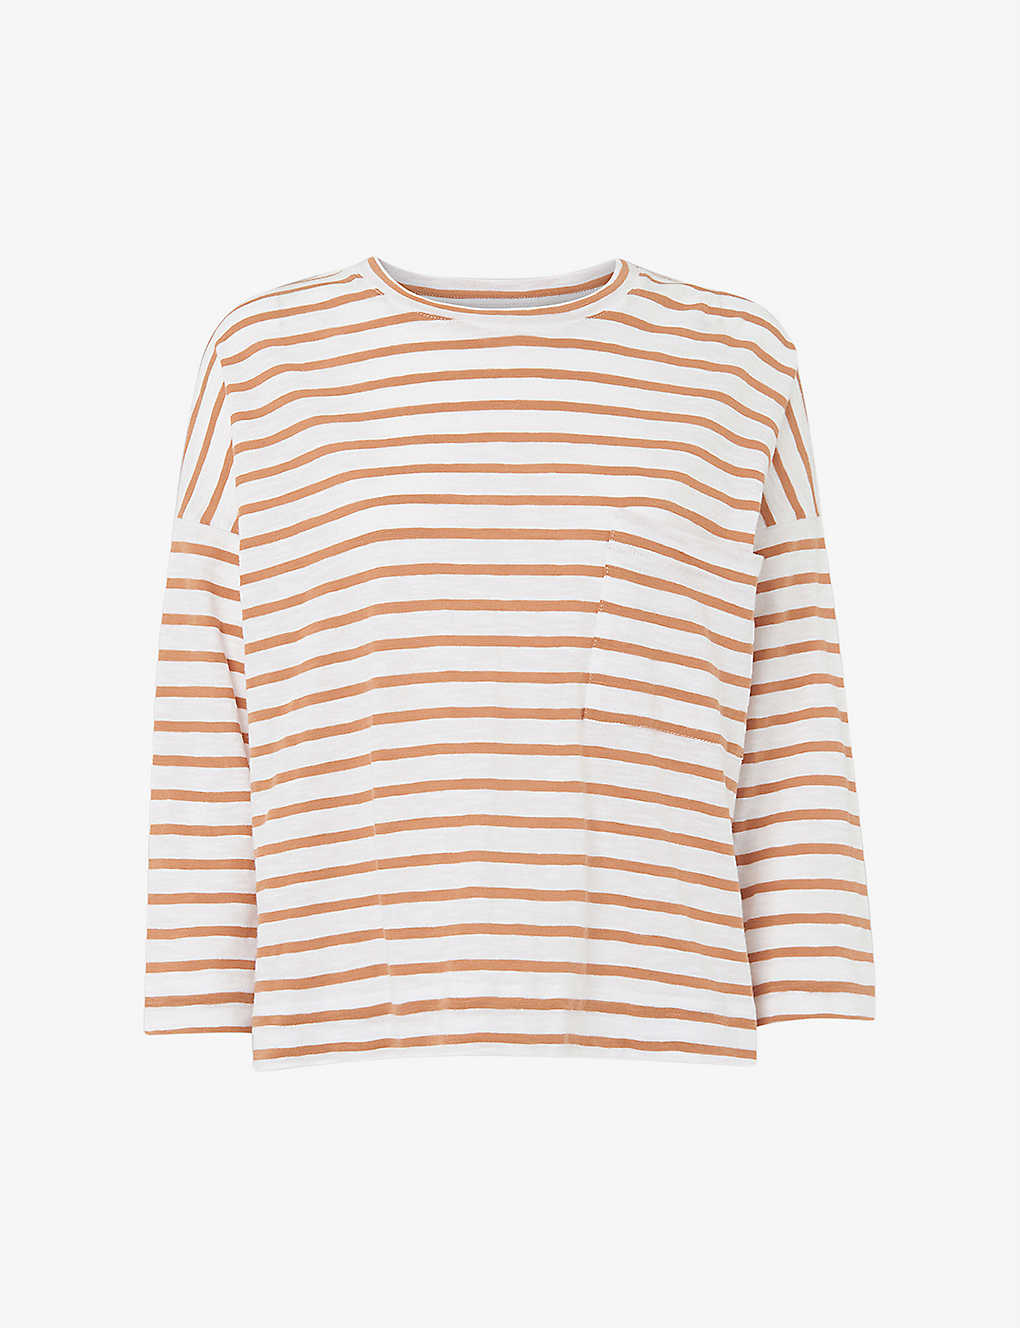 Shop Whistles Women's Multi-coloured Striped Cotton-jersey Top